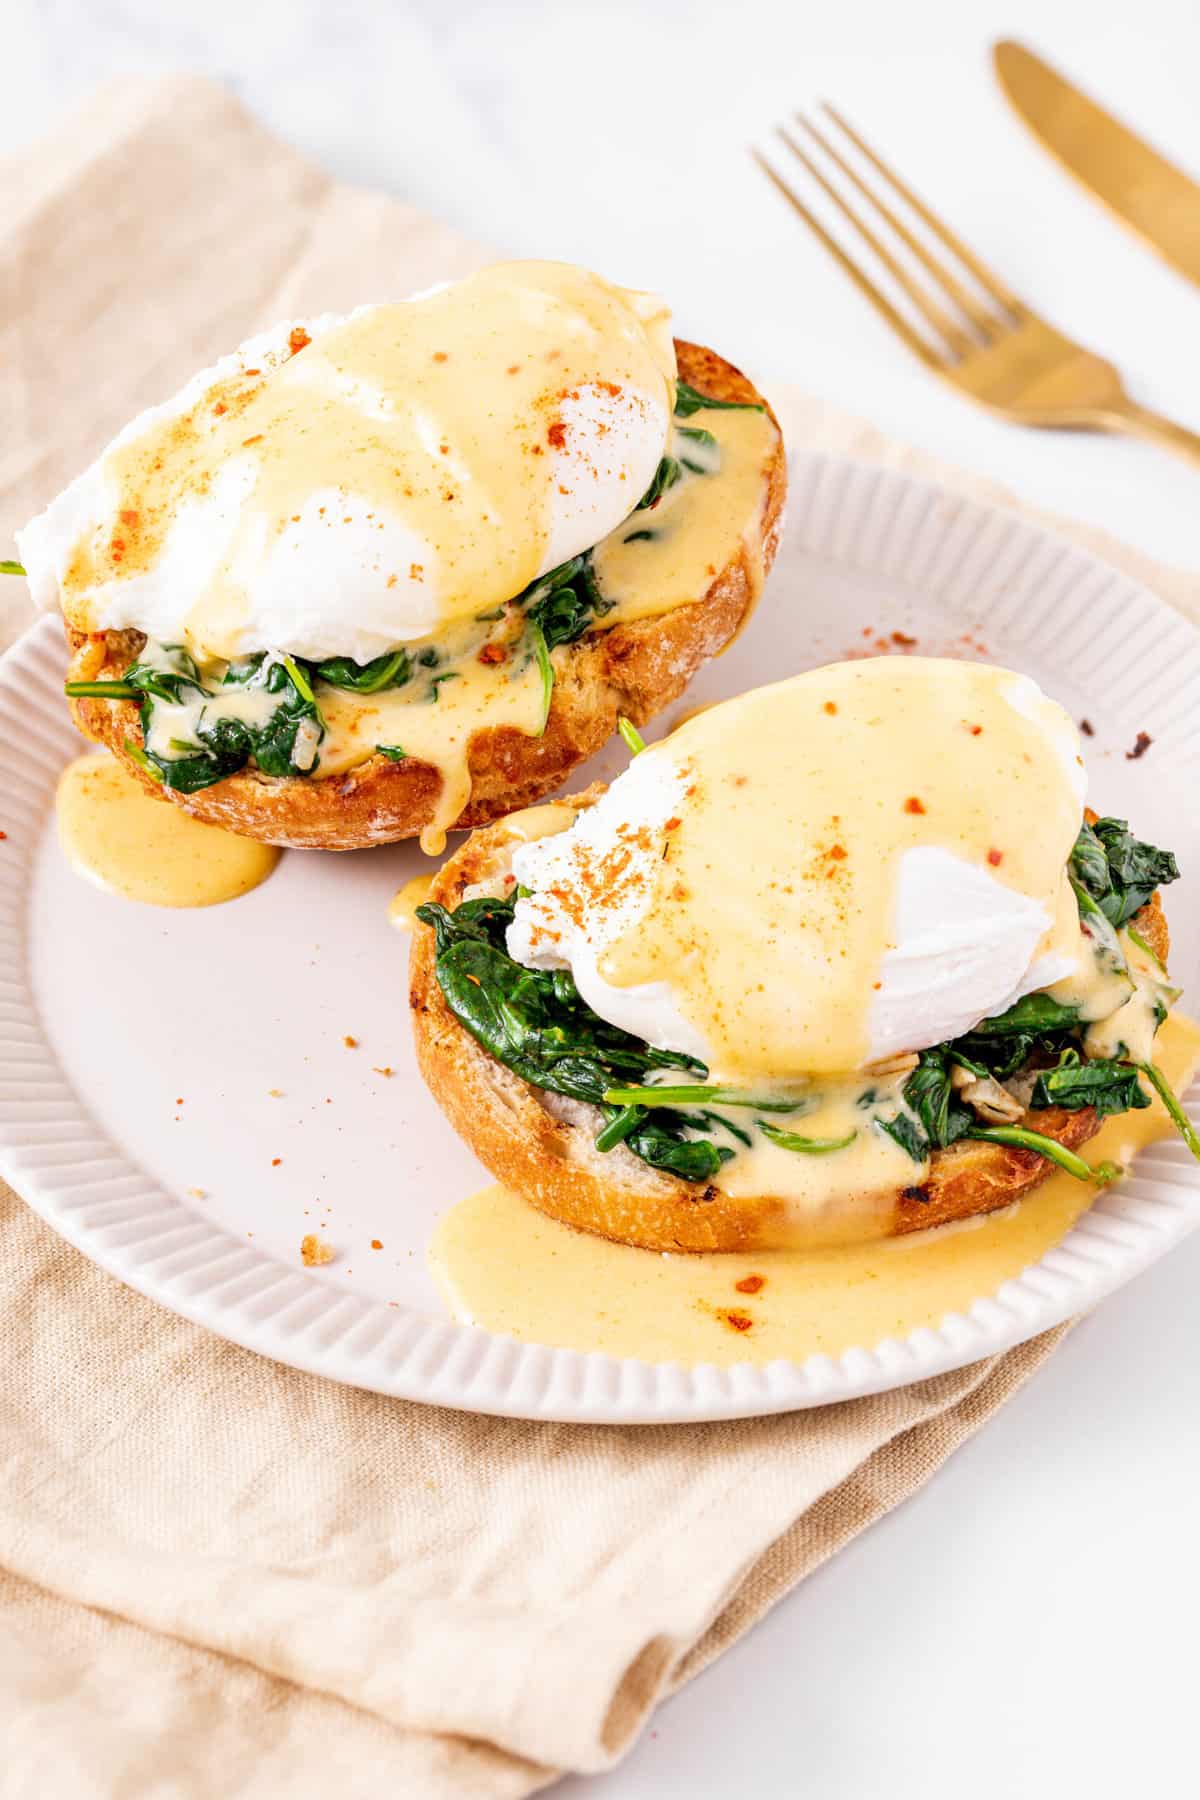 close up image of two eggs florentine served on a white plate with a gold fork, sitting on a beige kitchen towel